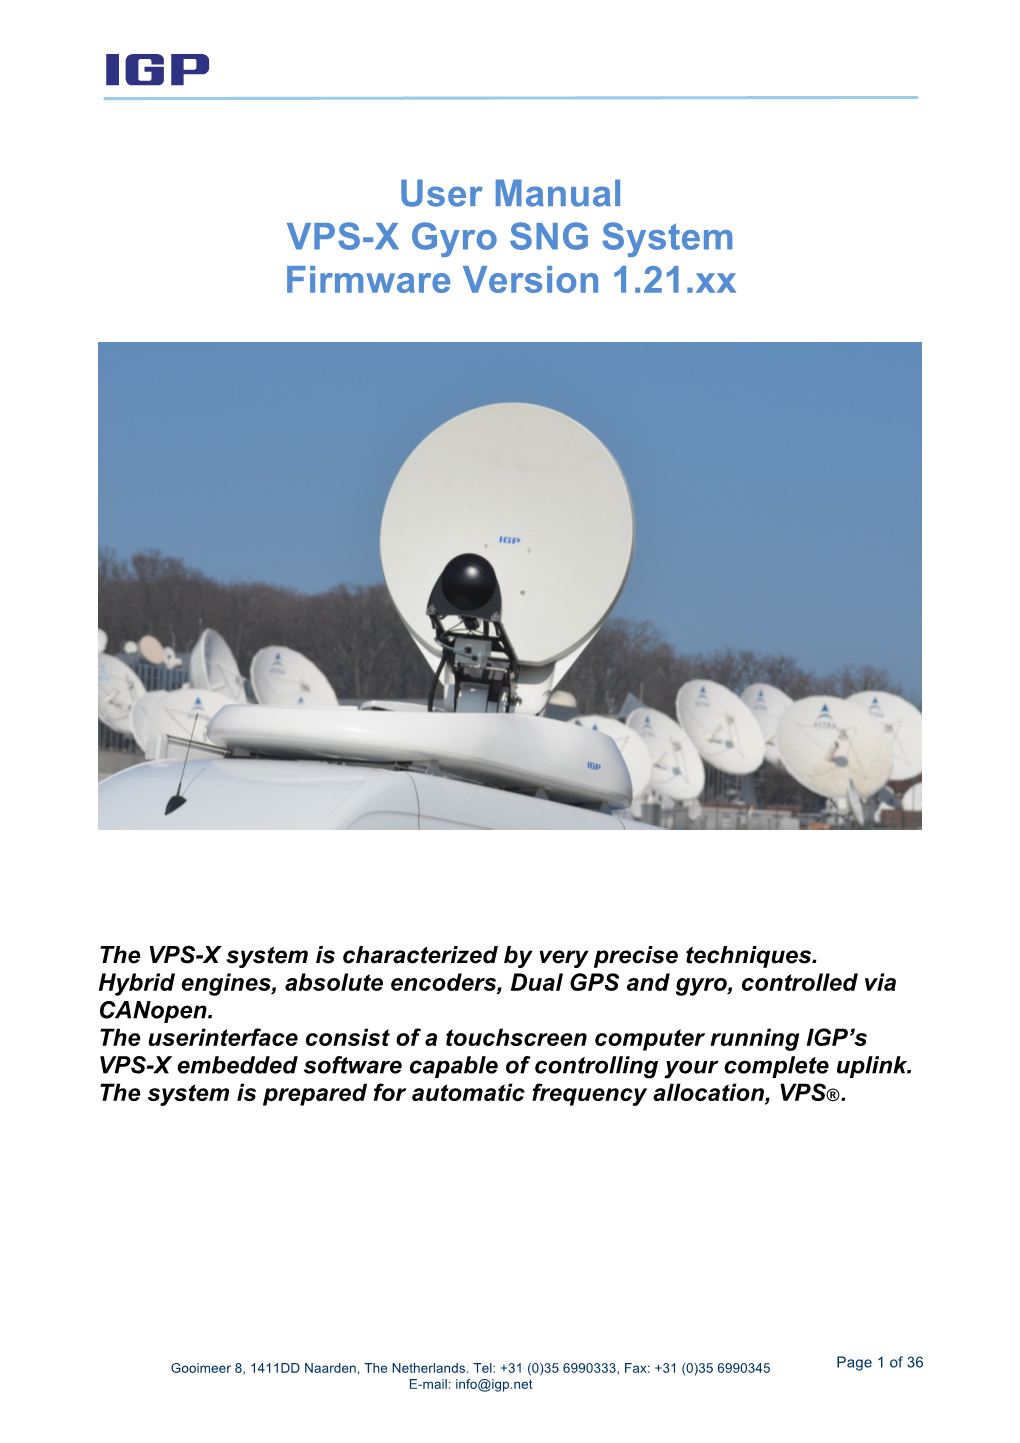 User Manual VPS-X Gyro SNG System Firmware Version 1.21.Xx